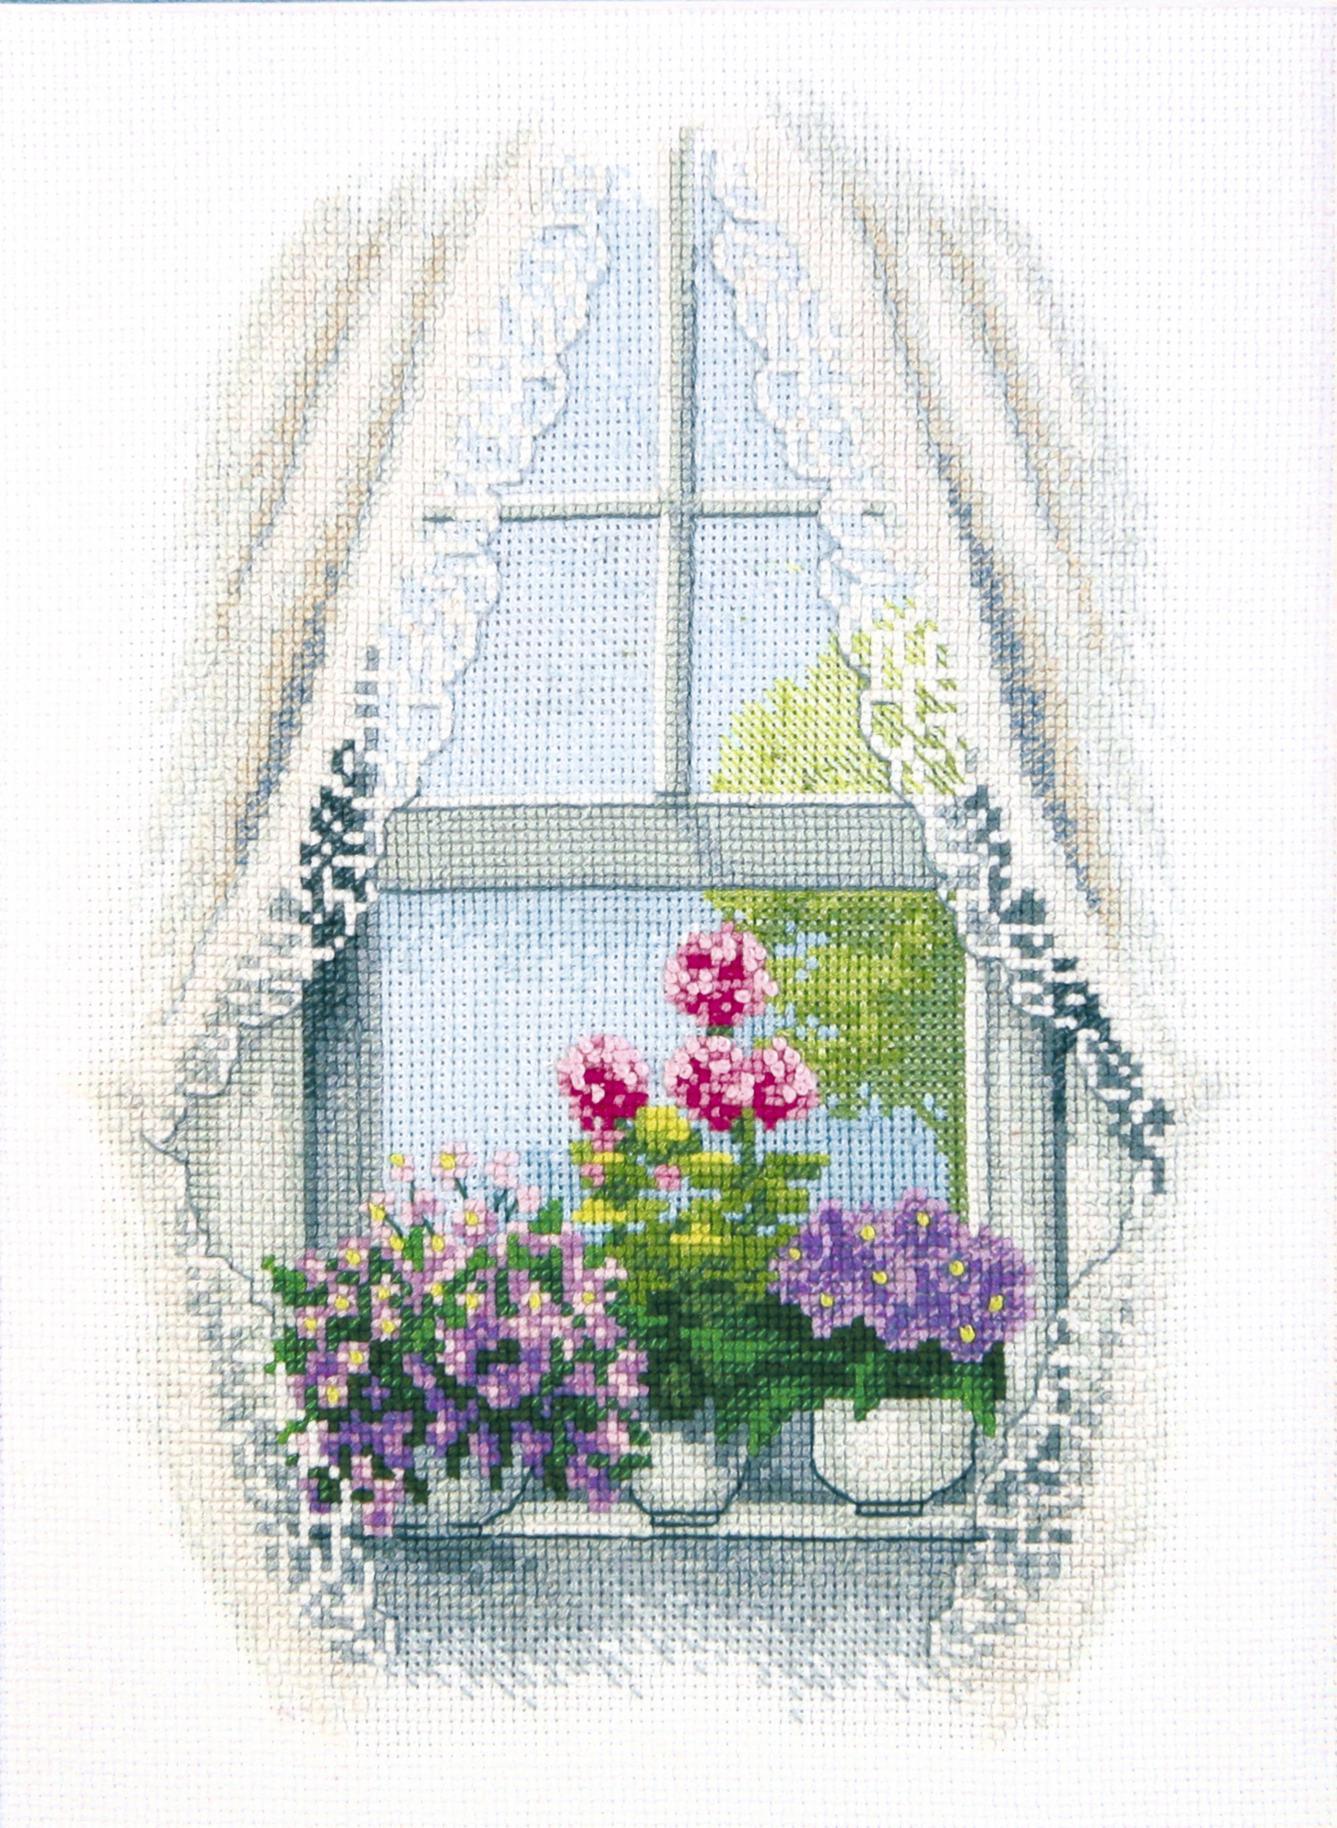 SWEET MEMORIES, Counted Cross Stitch Kit, 16 count Aida, size 18 x 24 cm, Charivna mit | Momentos Magicos (M-430)